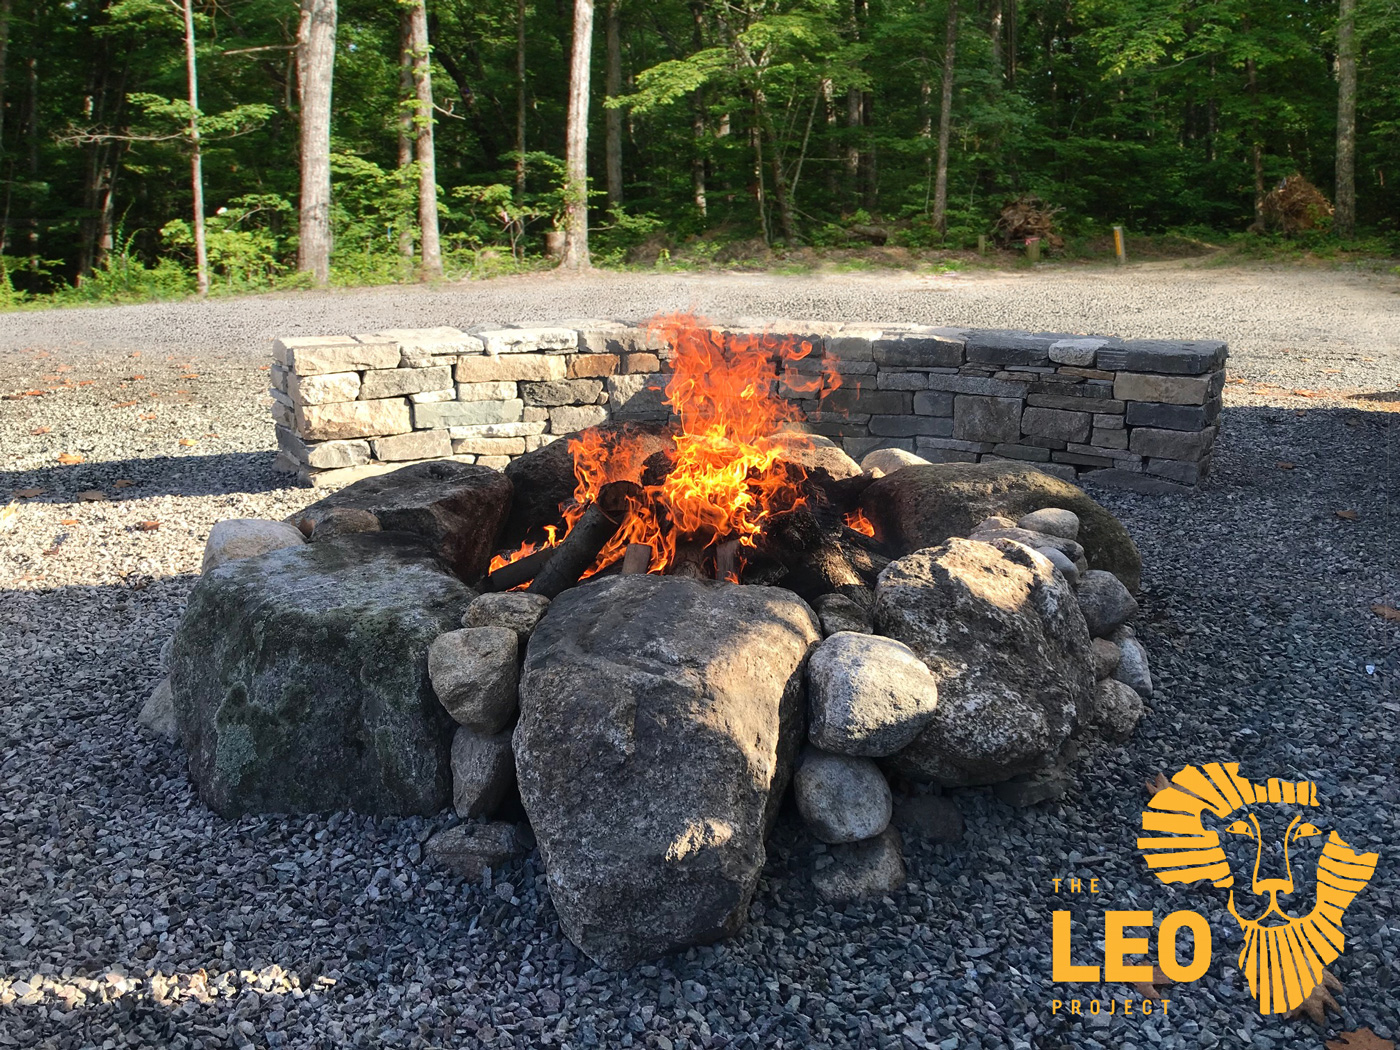 Custom Camp-Style Fire Pits to Benefit the Leo Project